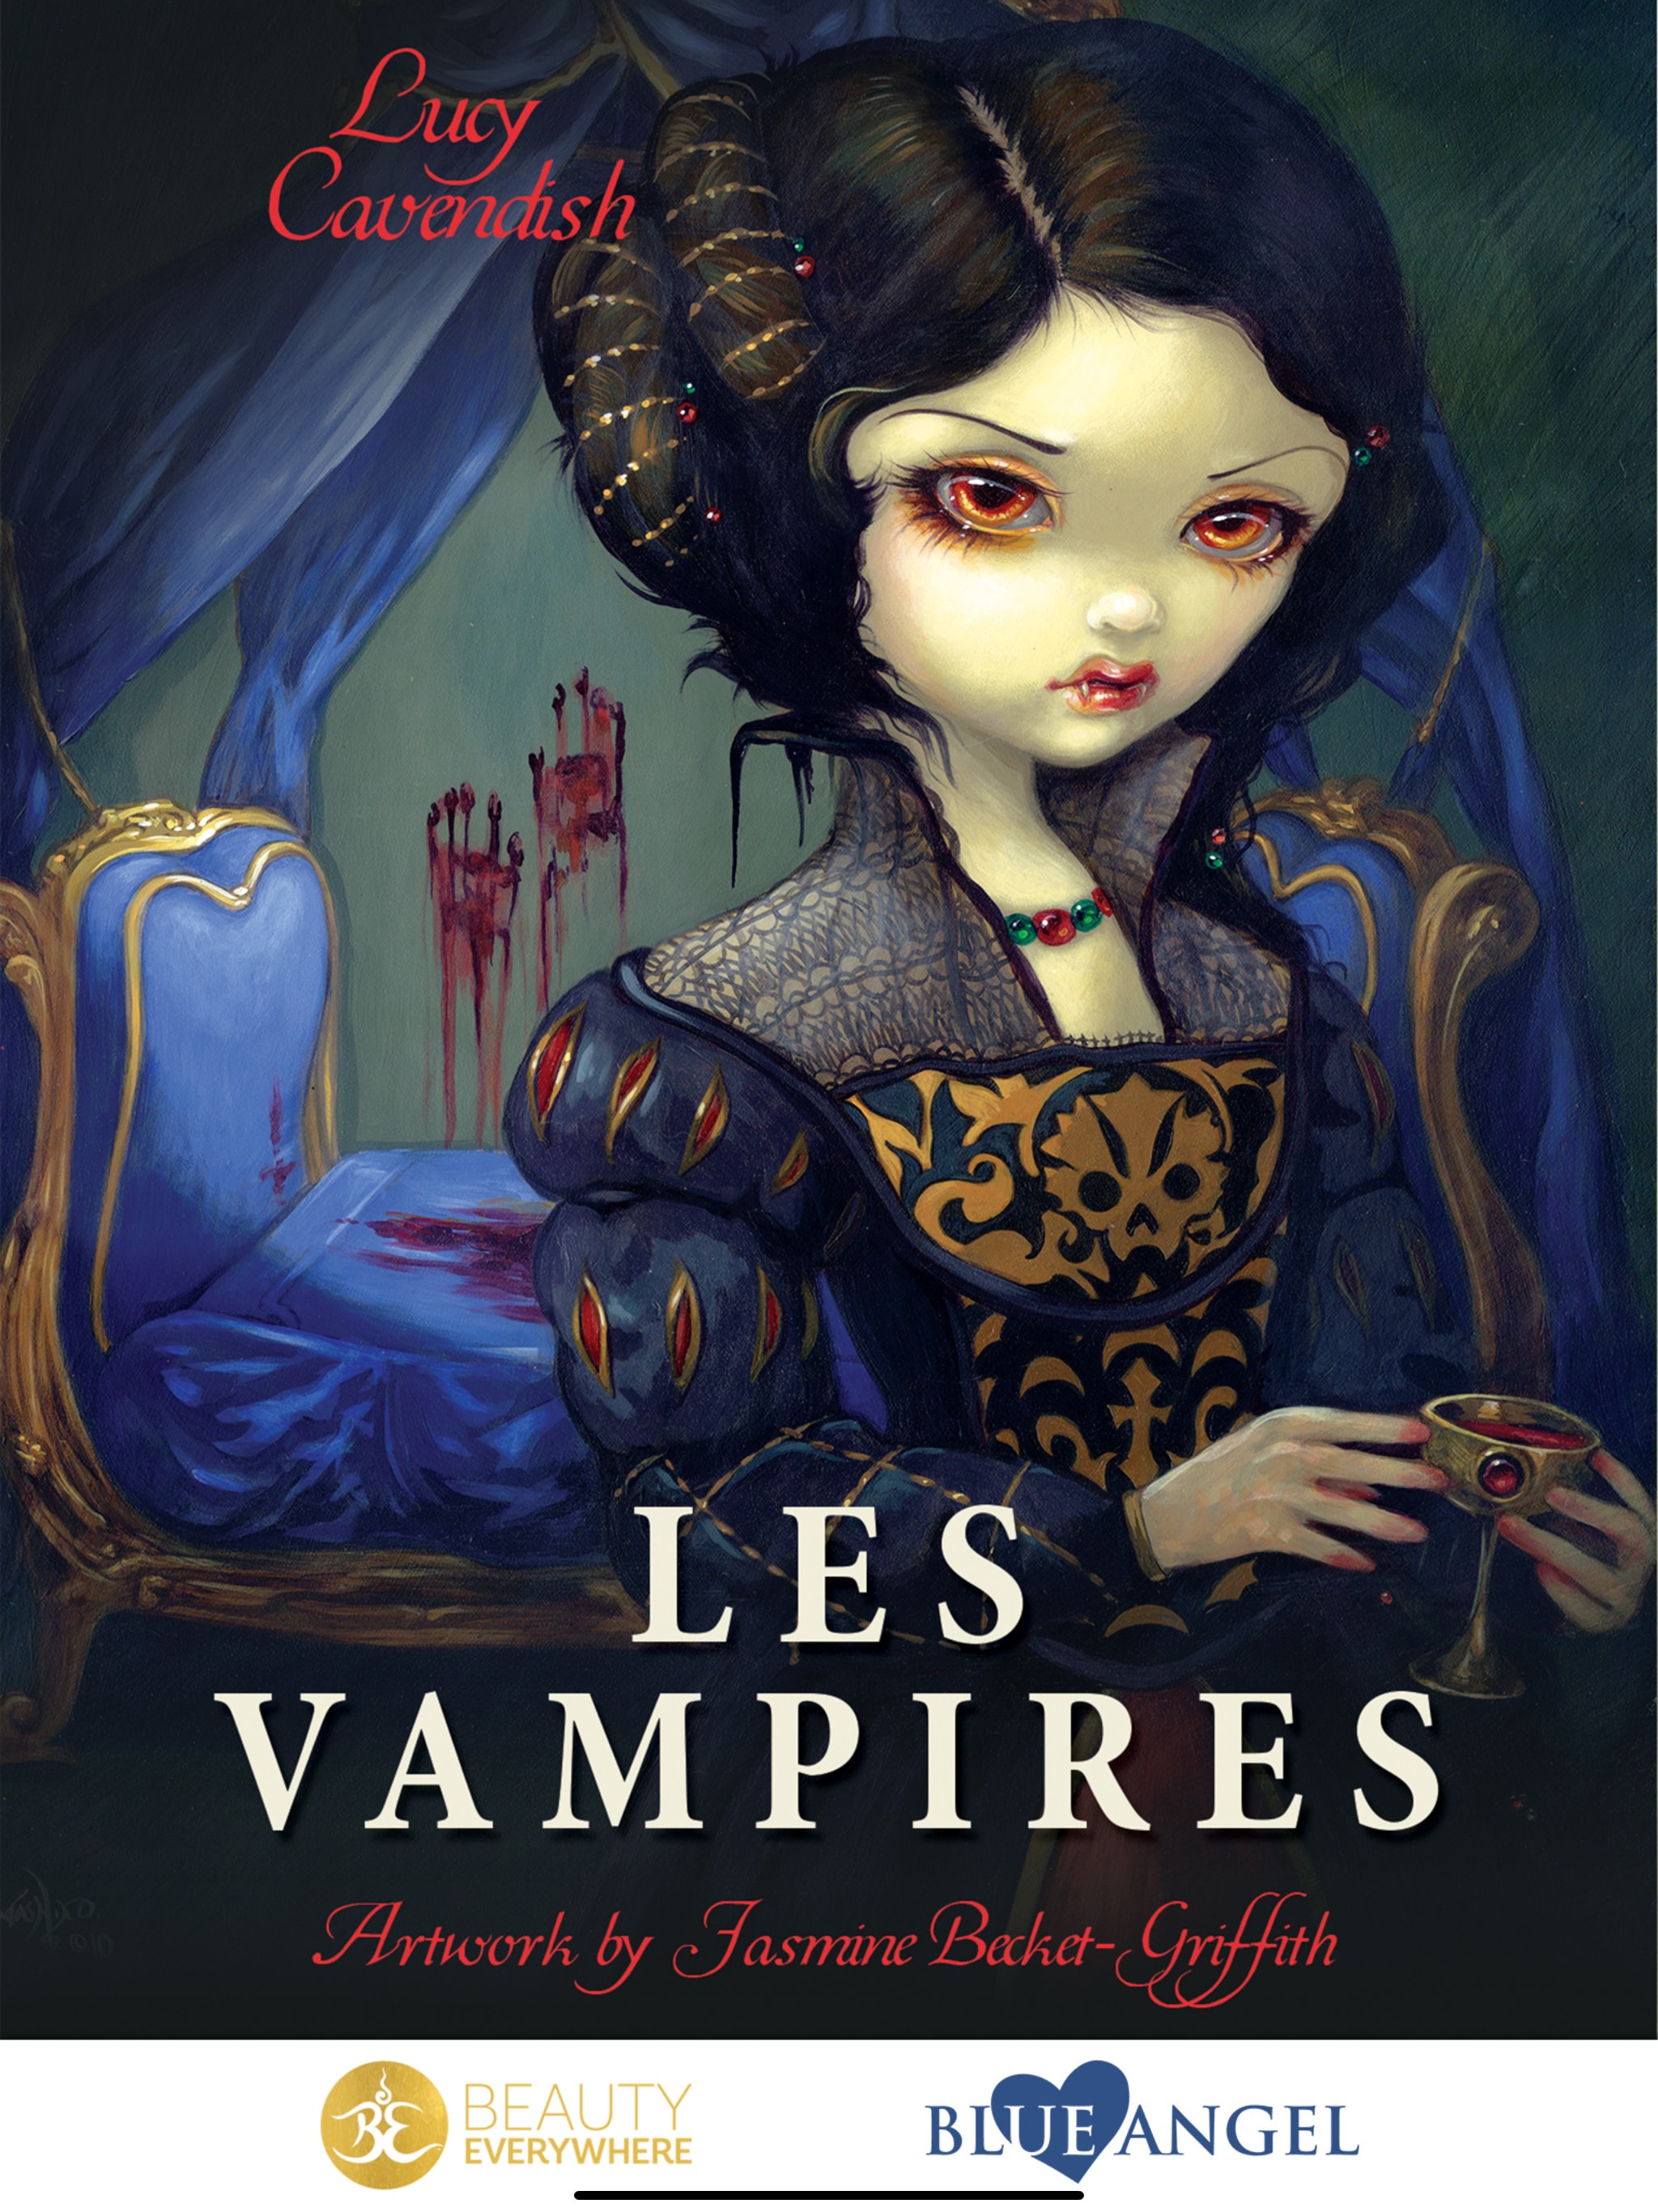 Les Vampires Oracle by Lucy Cavendish